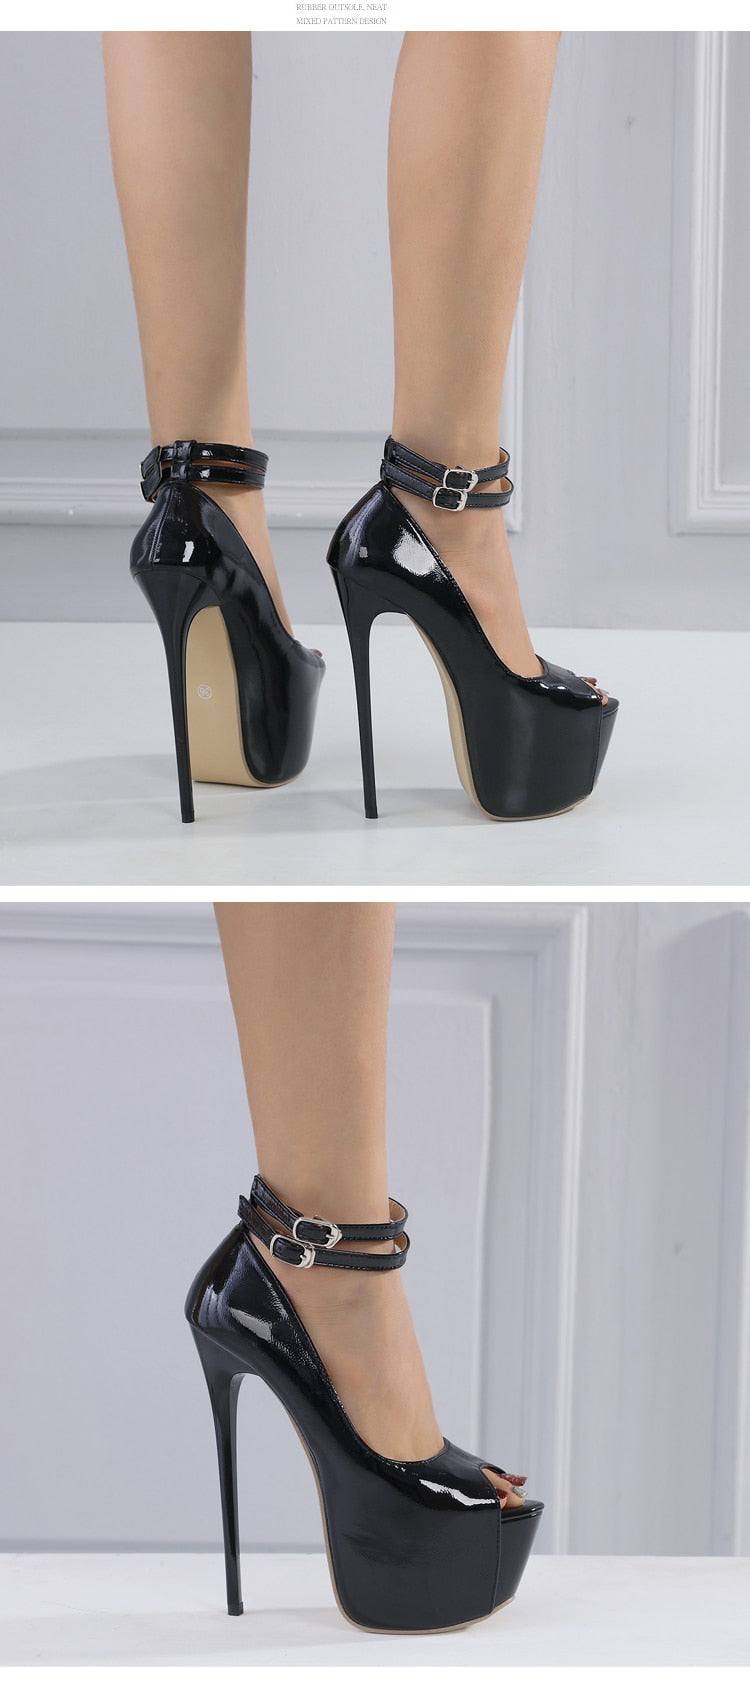 Sexy Open Toe Platform Extreme High Heels Women Pumps Stiletto Heels Double Breasted Buckle Pole Dancing Sandals Shoes